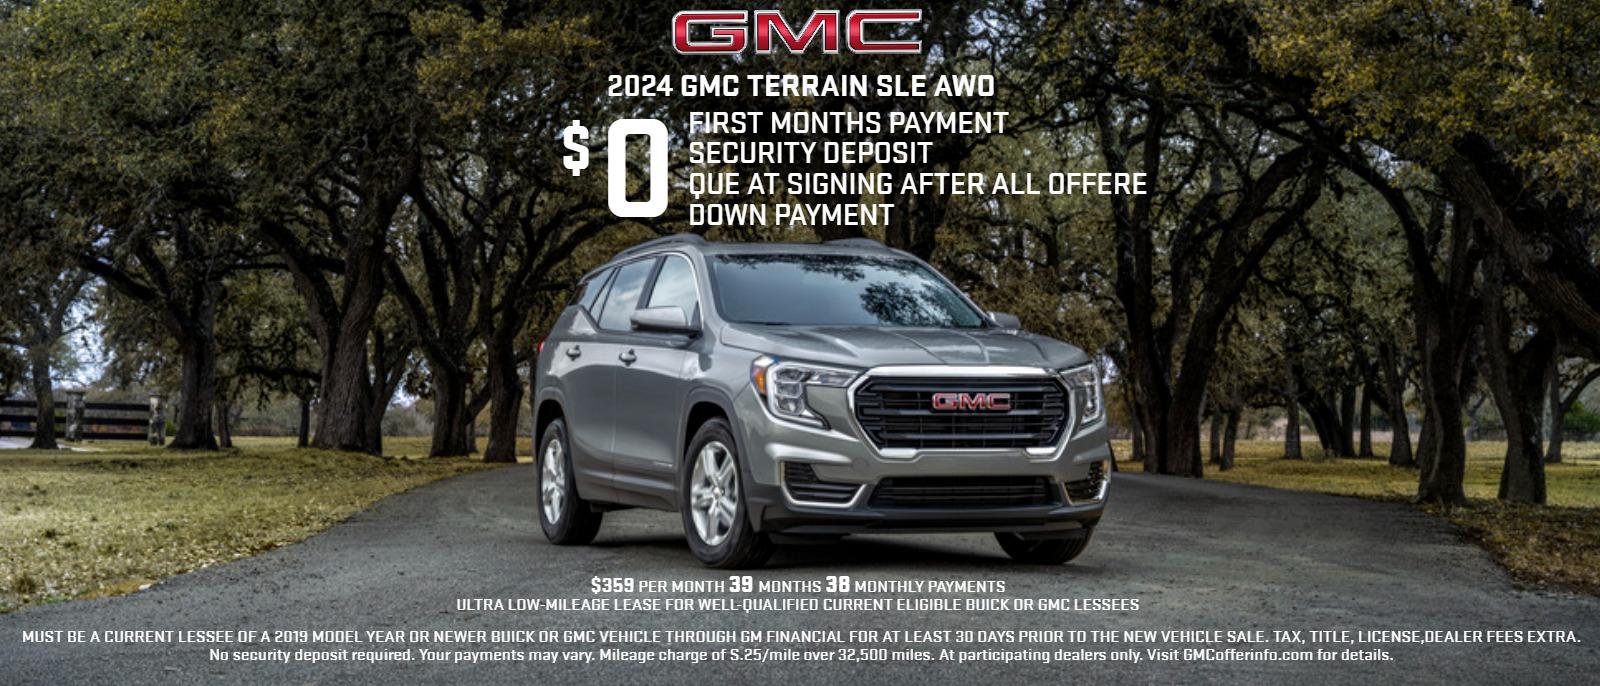 Certified Pre-owned Gmc Morris Il